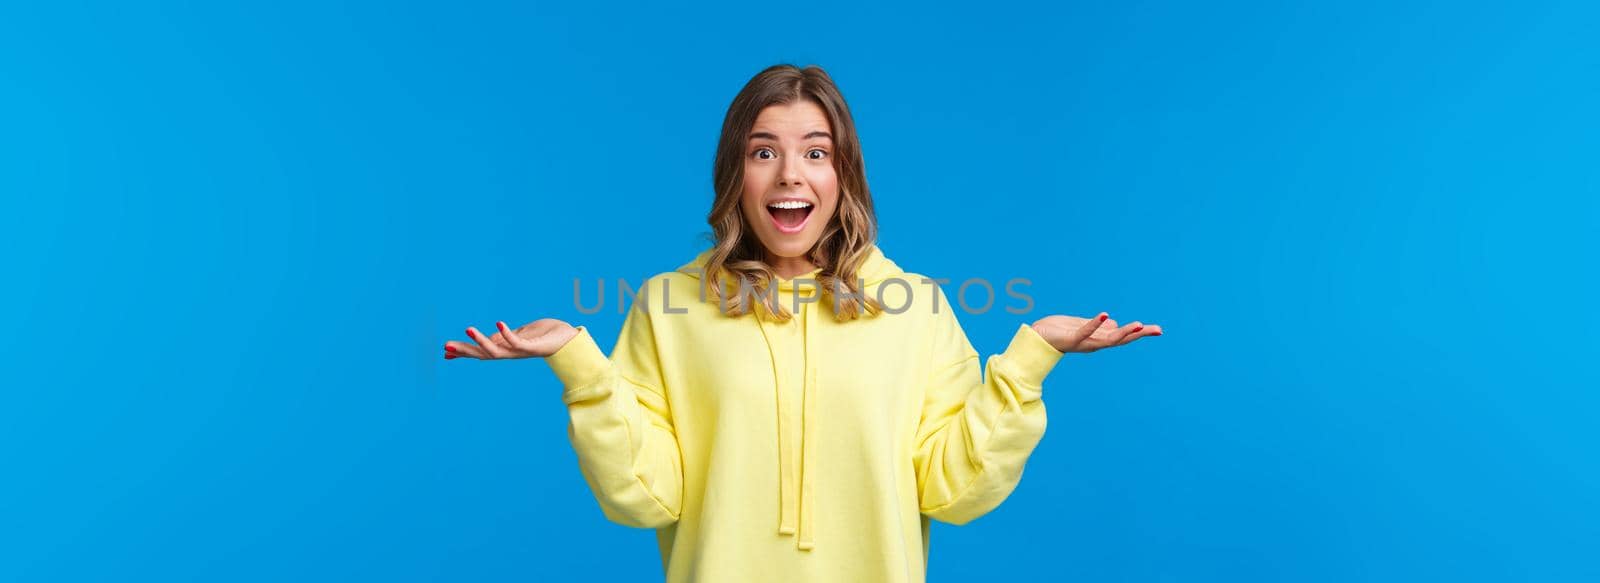 What nice surprise. Amused and happy cute blond caucasian woman spread hands sideways and shrugging smiling with excitement and disbelief, hear unexpected good news, blue background.